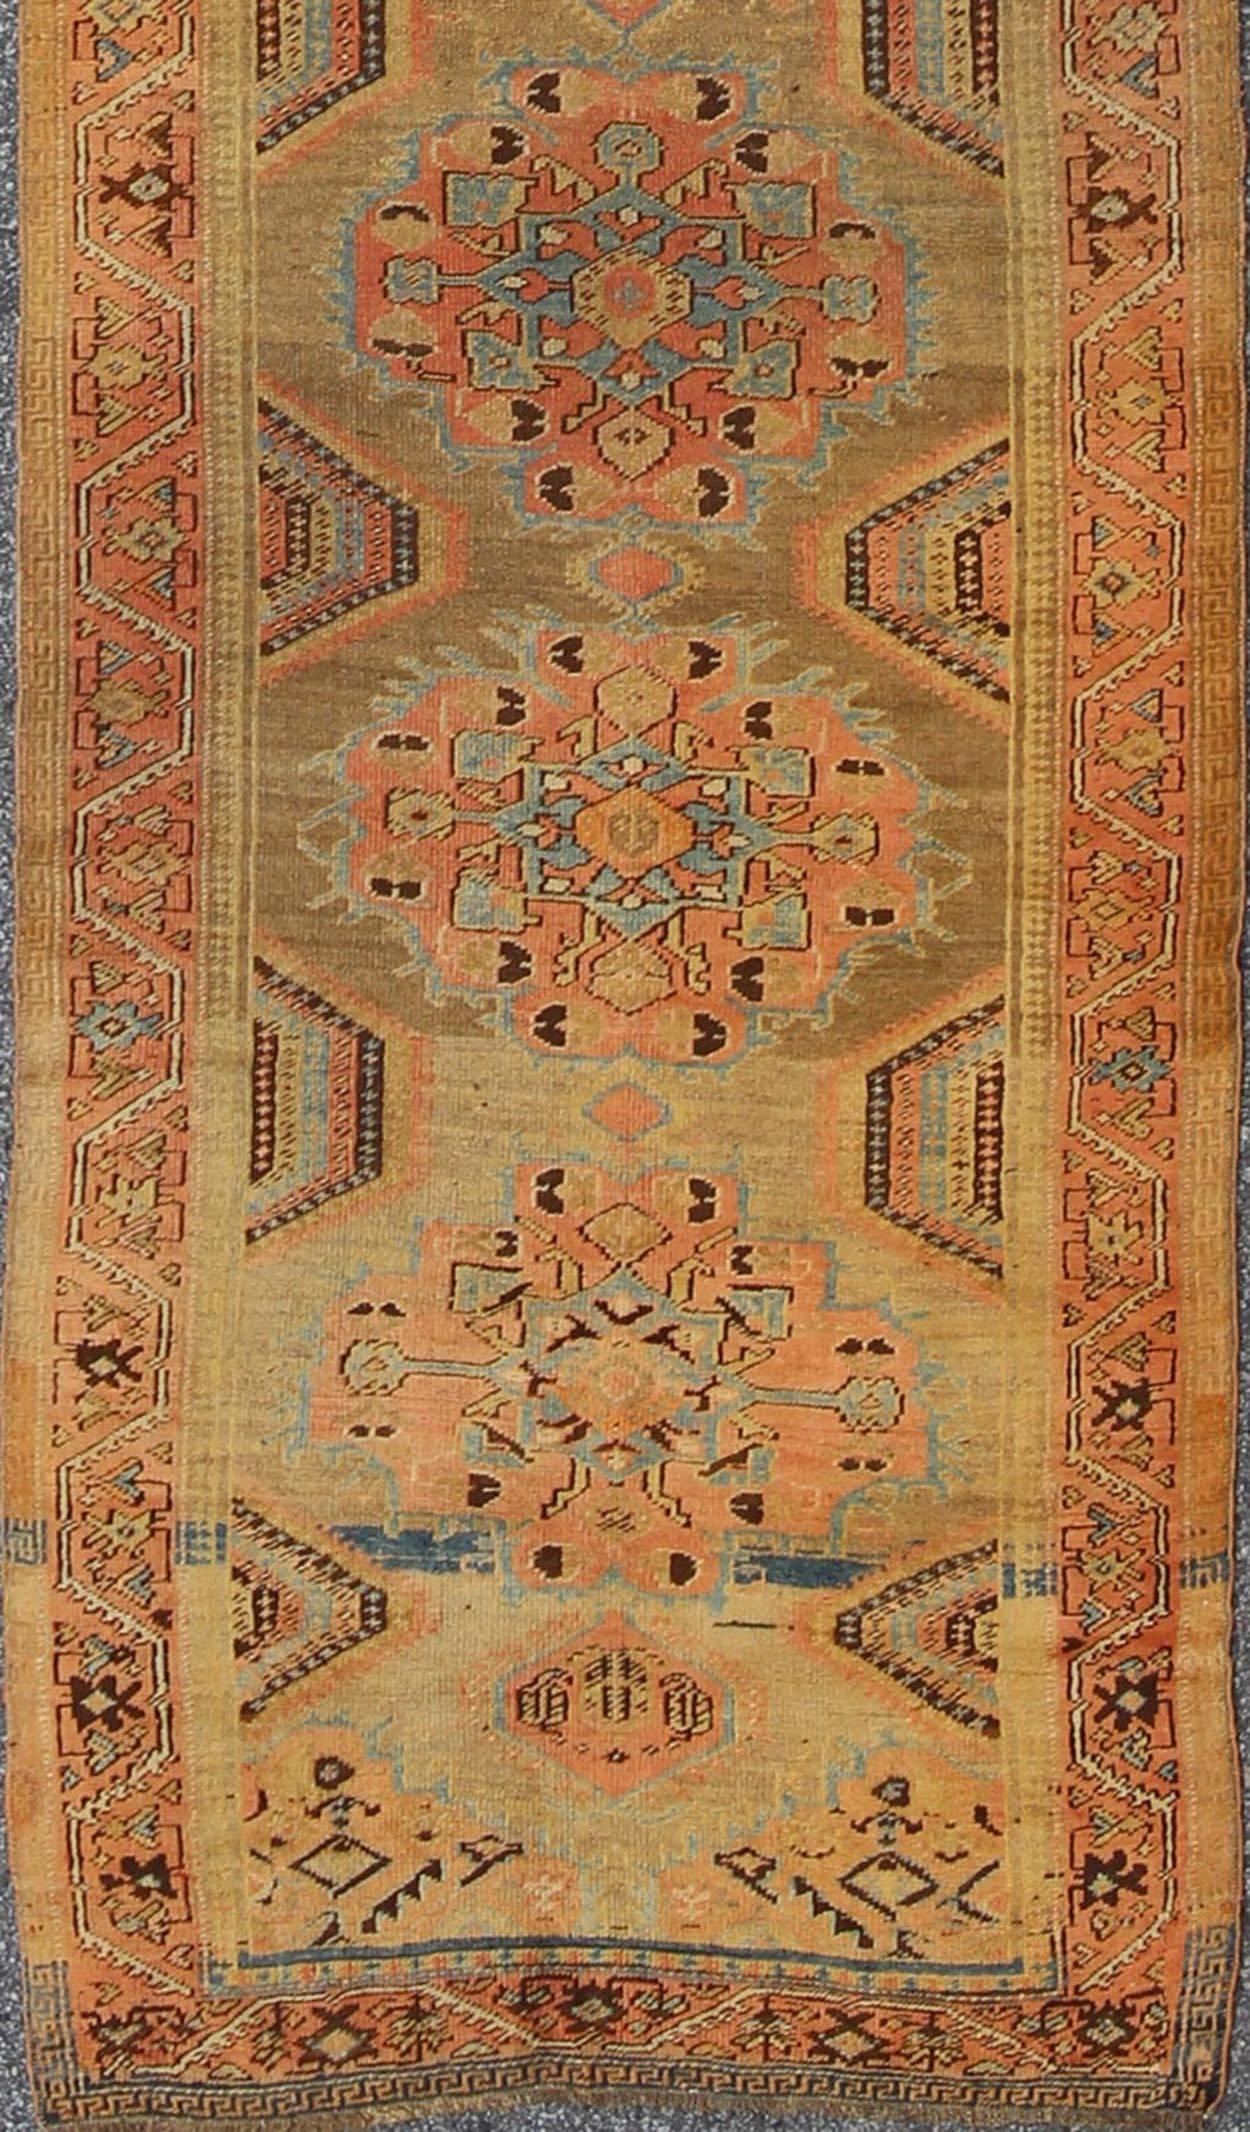 Early 20th century antique Oushak runner with medallions in sand, pink and blue, rug chm-2306, country of origin / type: Turkey / Oushak, circa 1920

This compelling and unique Oushak runner was made in the early 20th century, circa 1920, in Turkey.